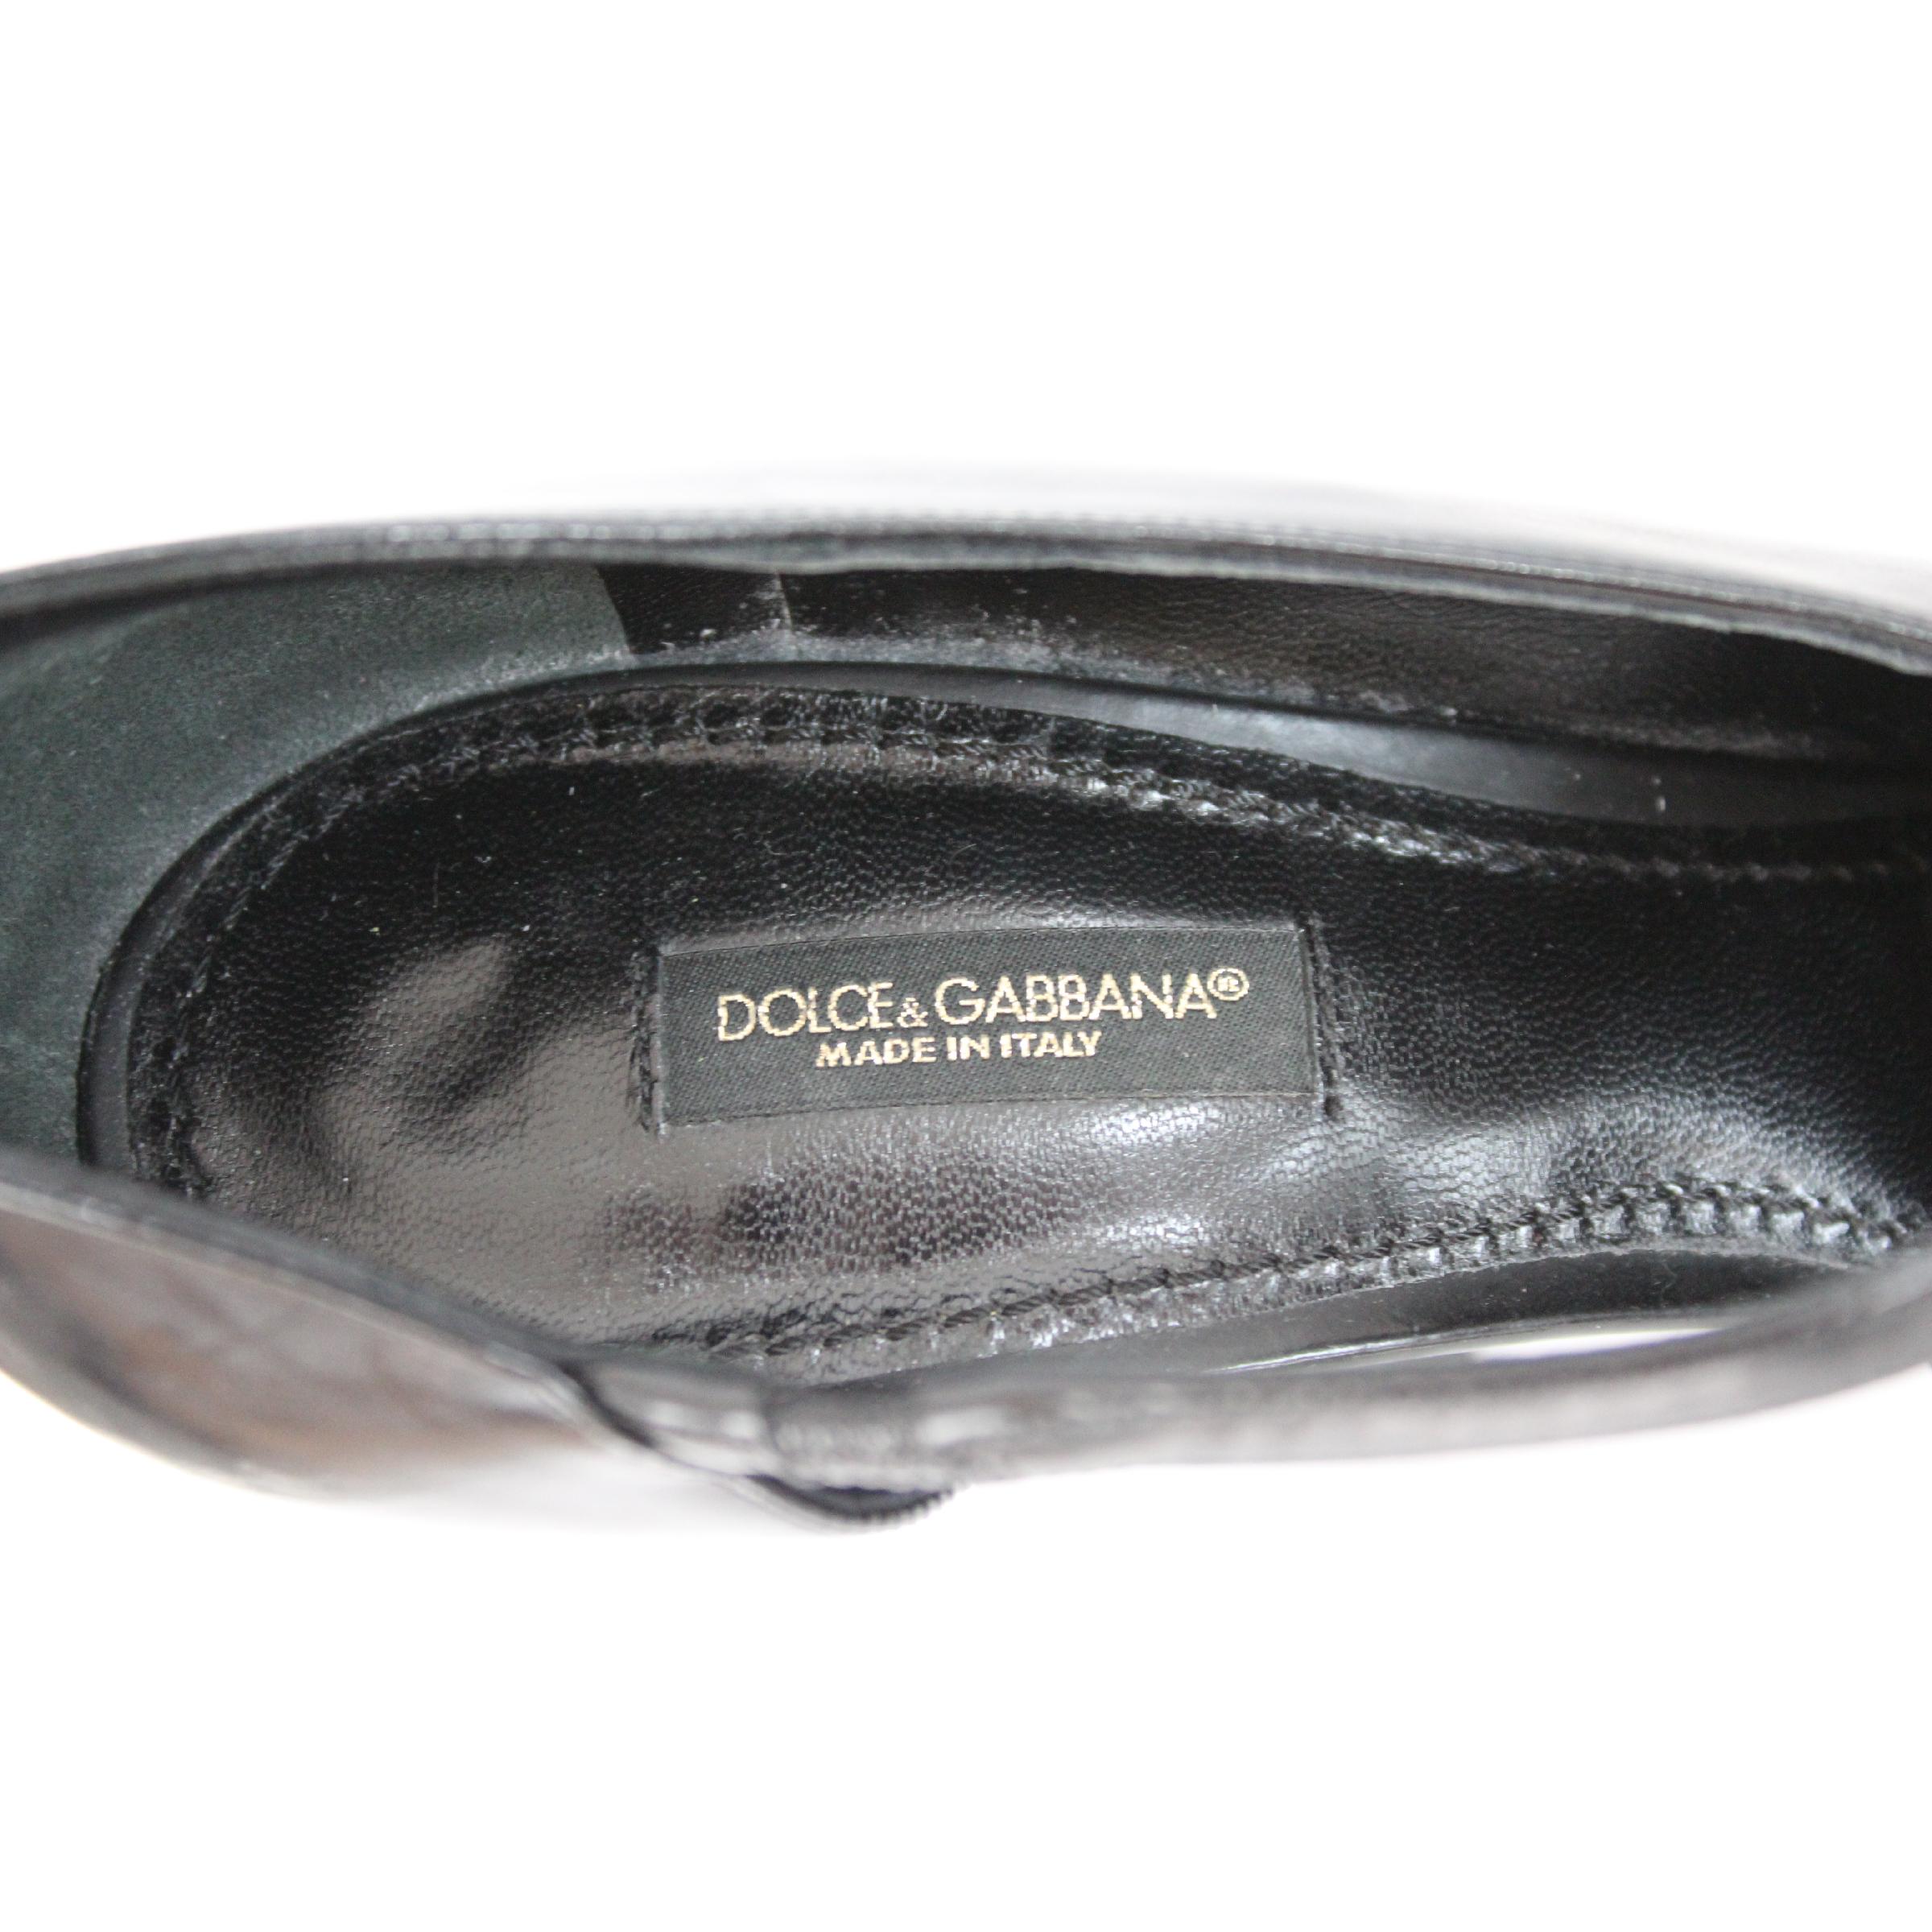 2000s Dolce & Gabbana Black Patent Leather Heel Shoes For Sale 2